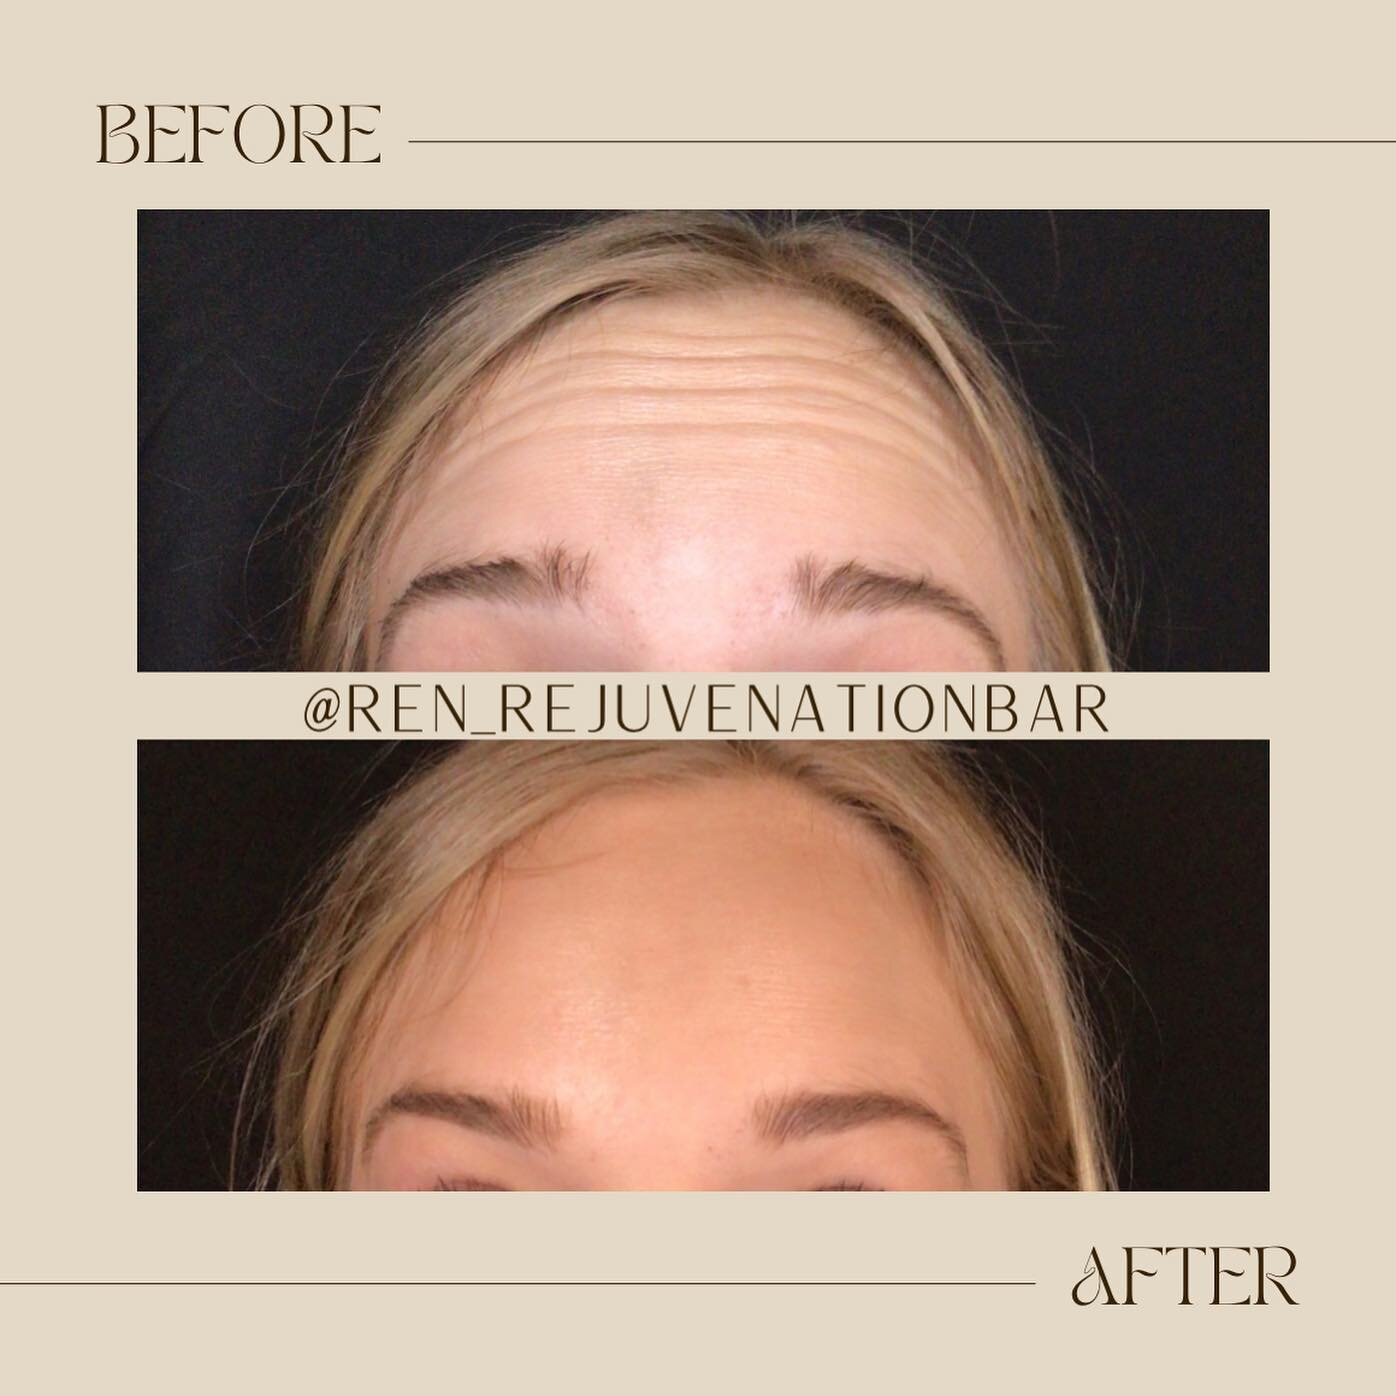 Preventative tox in your 20s helps prevent lines at rest (static lines) from forming. Your future self will thank you 😘

There&rsquo;s no perfect age to start aesthetic treatments&hellip;whether is the prevention, treatment or reversal of the aging 